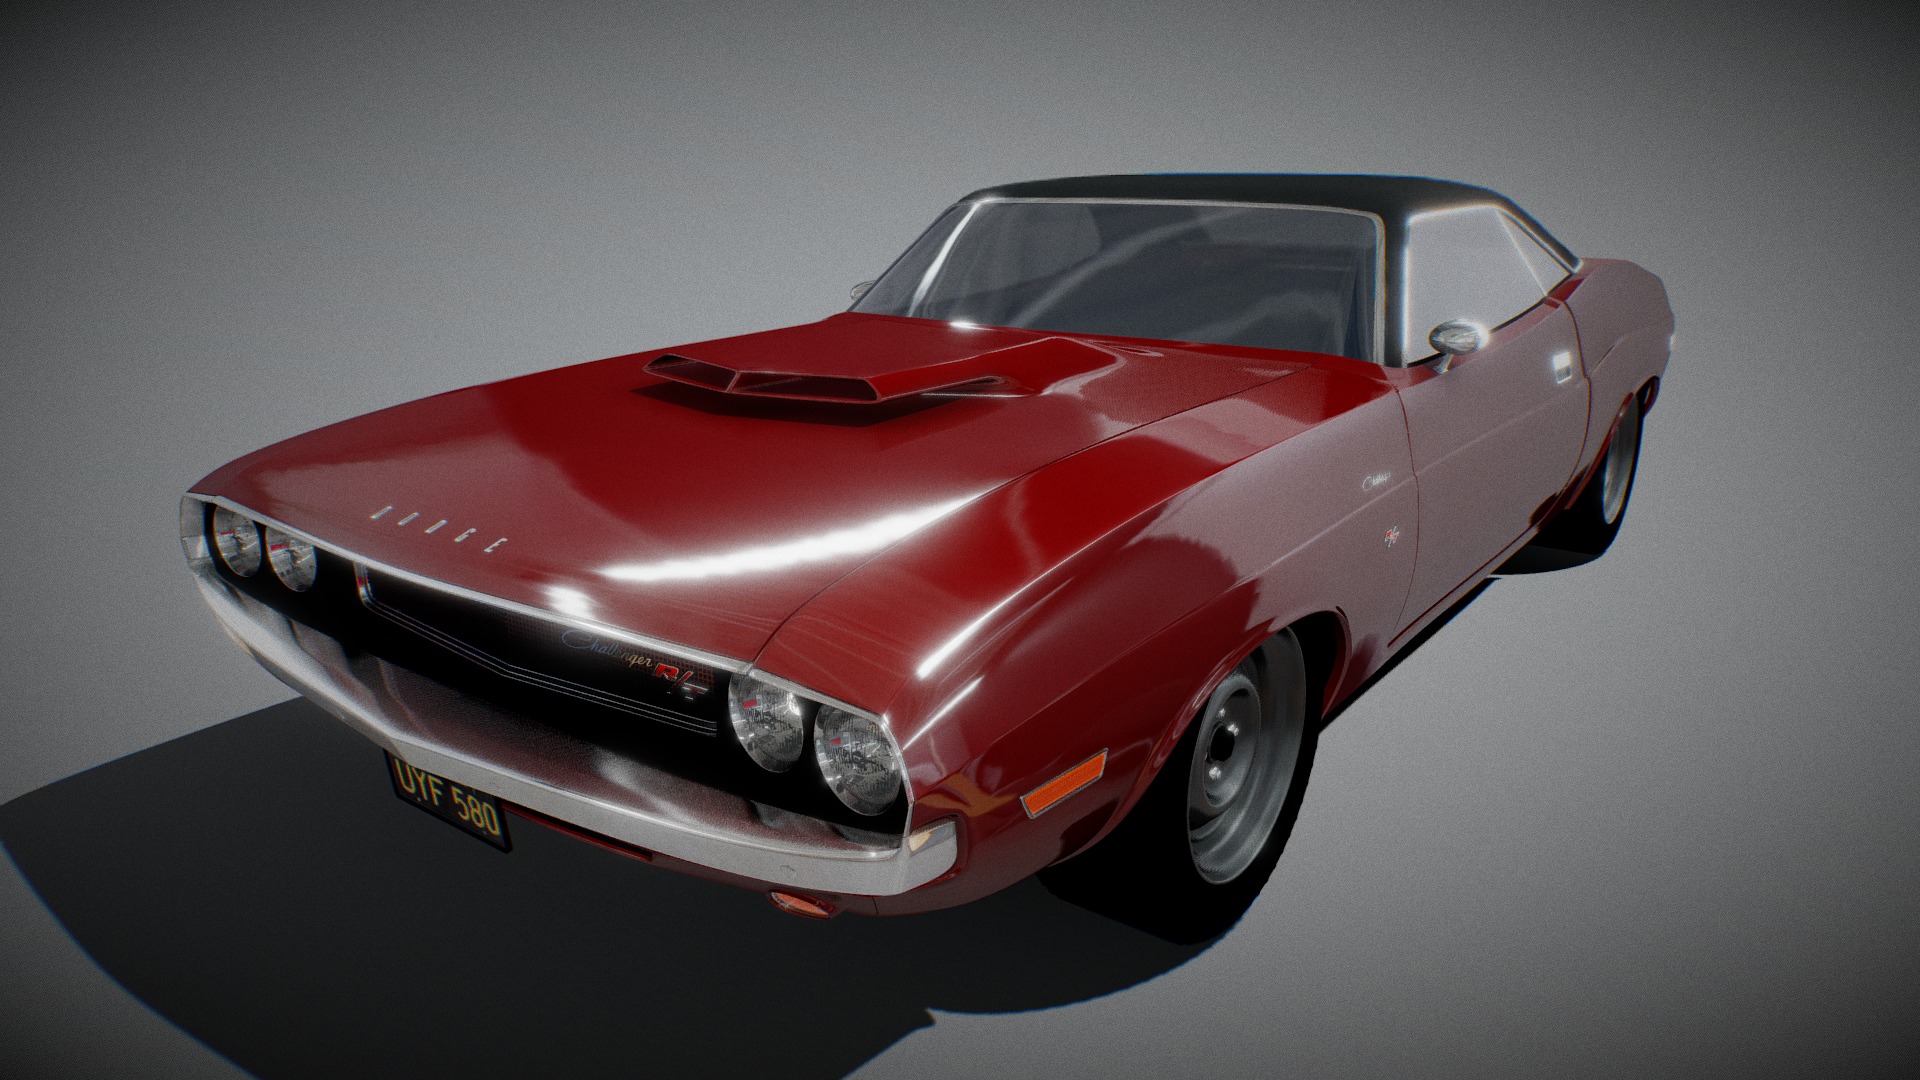 3D model Dodge Challenger 1970 - This is a 3D model of the Dodge Challenger 1970. The 3D model is about a red sports car.